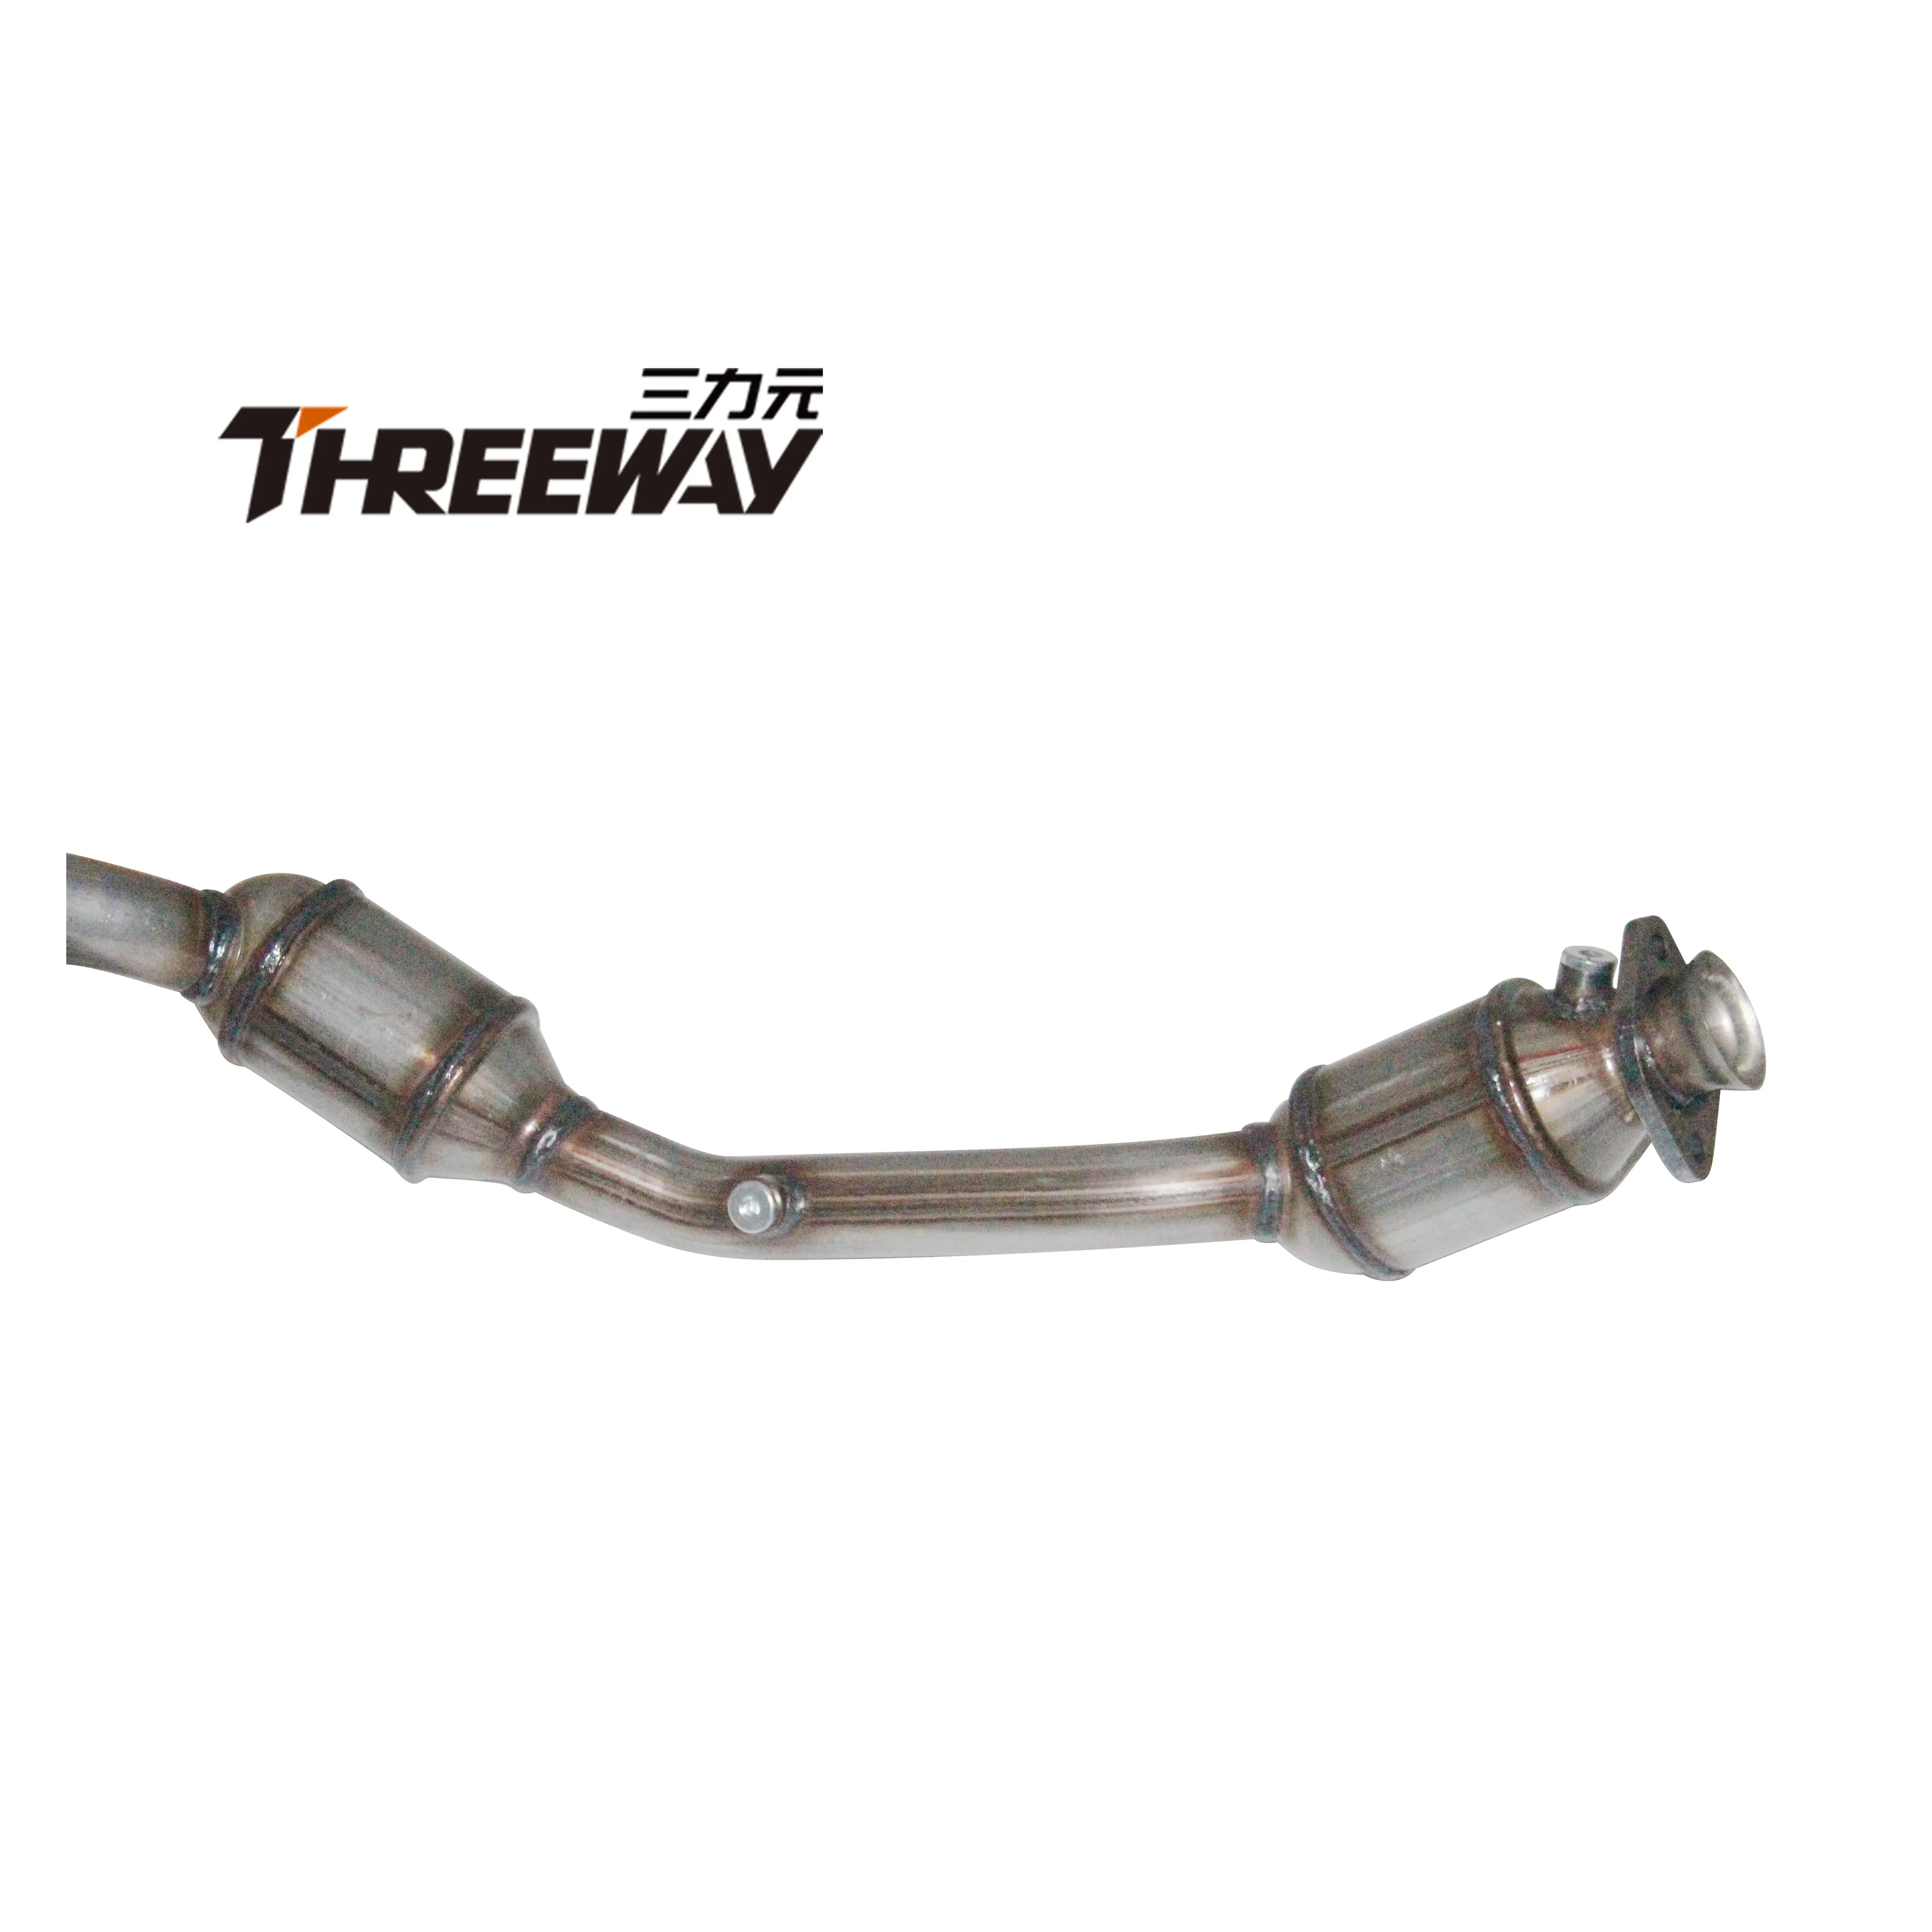 Catalytic Converter Y Pipe For 2007 2008 2009 Jeep Wrangler 6 Cyl  -  Buy For Jeep Catalytic Converter,Catalytic Converter,Exhaust Catalytic  Converter Product on 